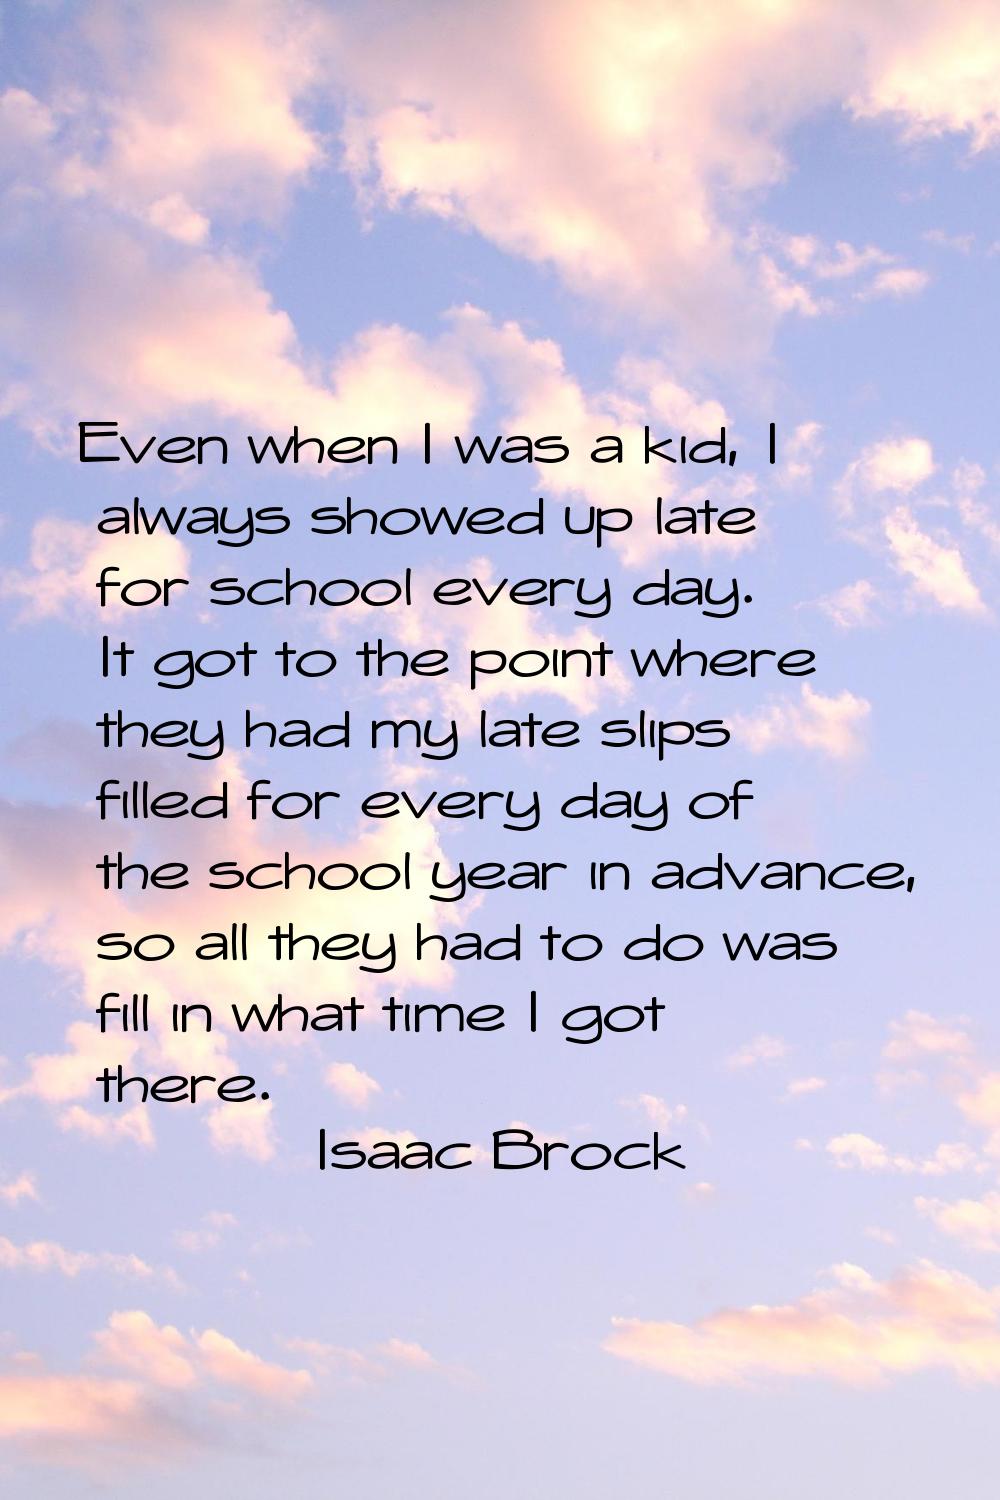 Even when I was a kid, I always showed up late for school every day. It got to the point where they